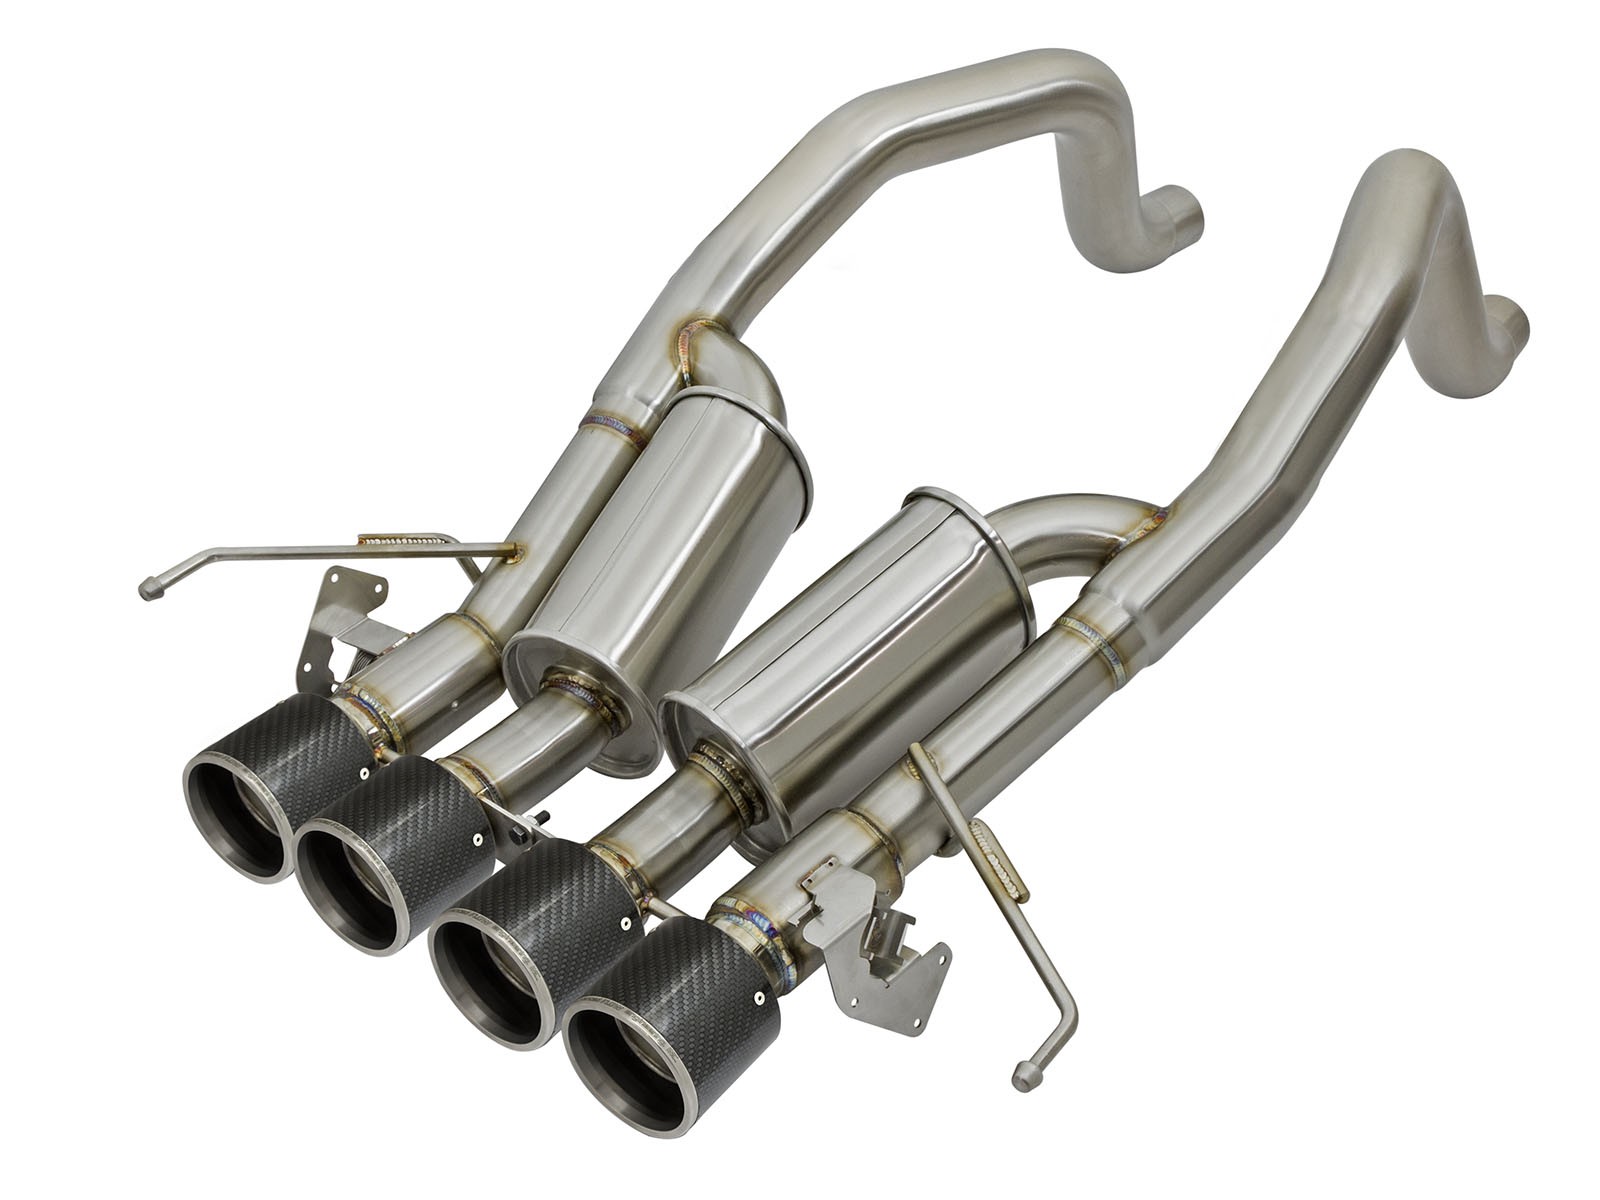 C7 Corvette Z06 15-17 w/ Factory Style NPP Valves, CF MACH Force-XP 3" to 2-1/2" 304 Stainless Steel Axle-Back Exhaust System